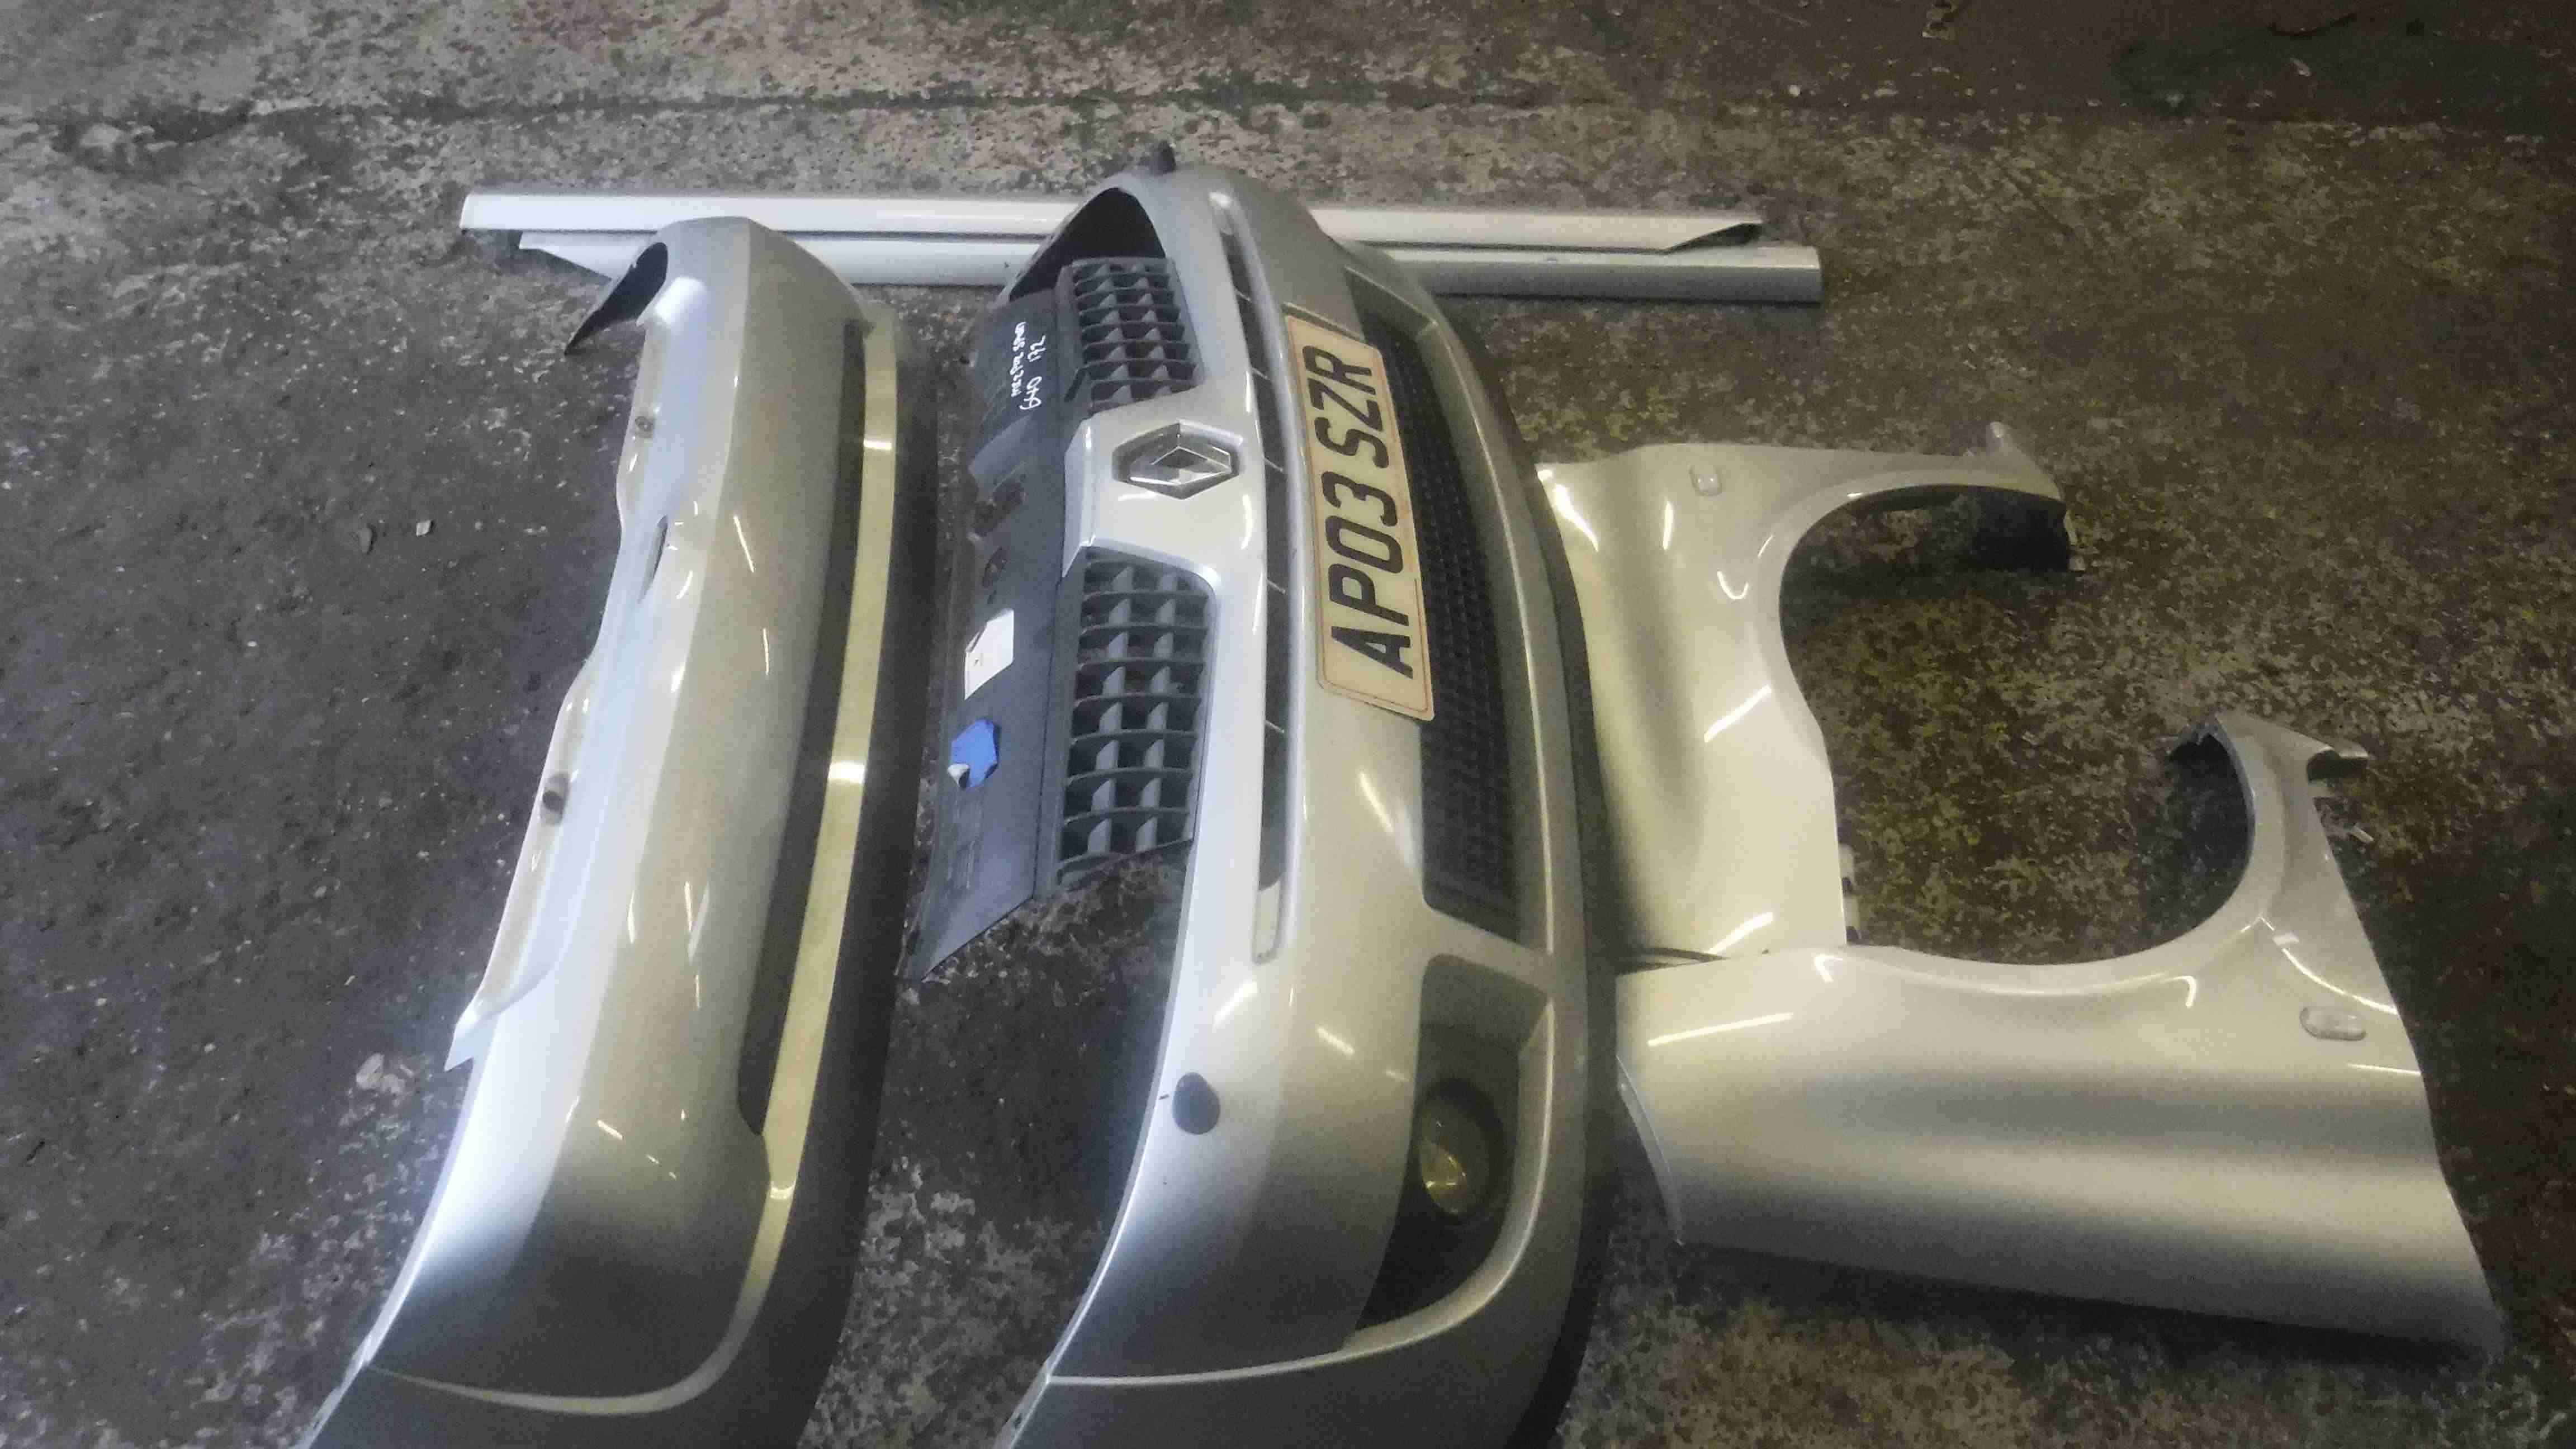 Renault Clio Sport 2001-2006 172 Front Bumper Body Kit Skirts Wings Silver  640 - Store - Renault Breakers - Used Renault Car Parts & Spares Specialist